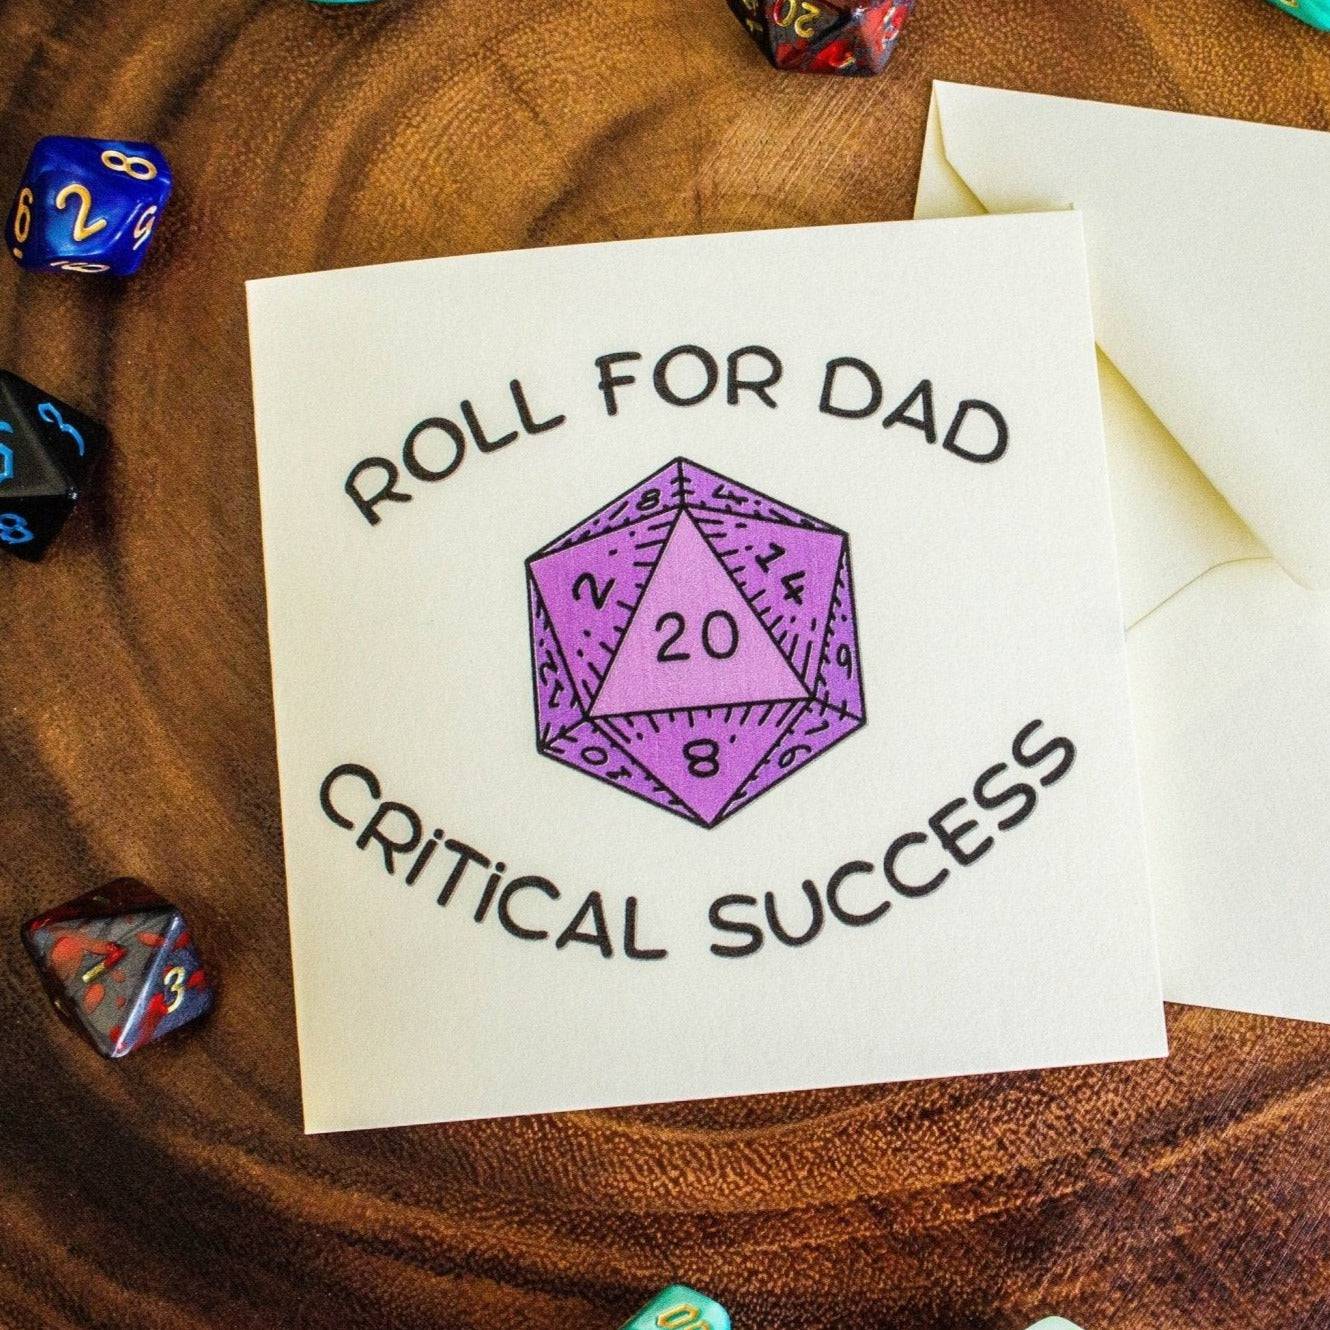 Roll for Dad - Fathers Day DnD Card - Mystery Dice Goblin